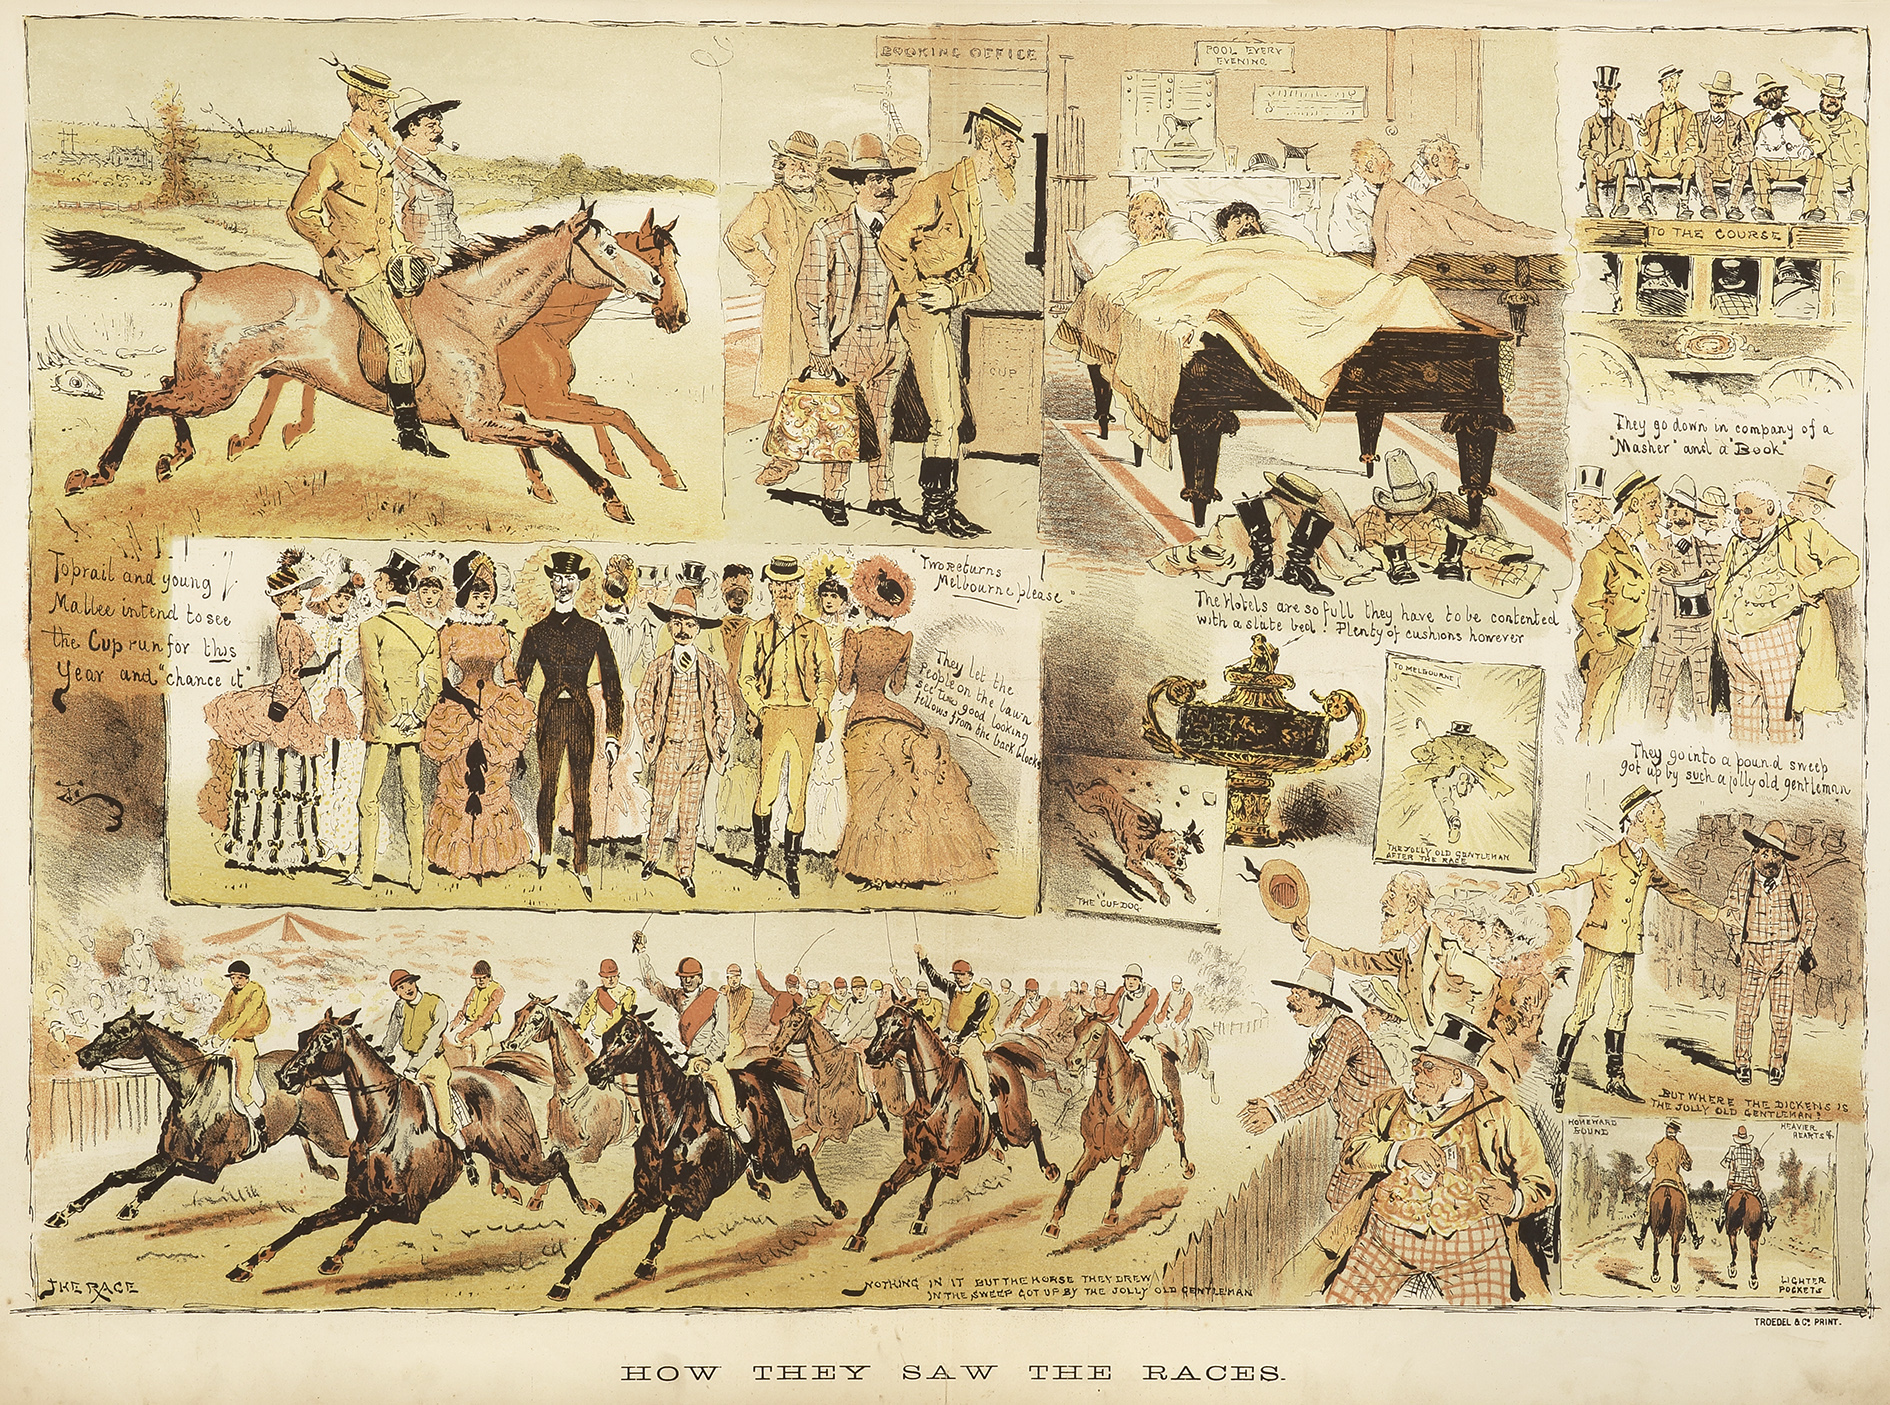 How They Saw the Races. - Antique Print from 1883